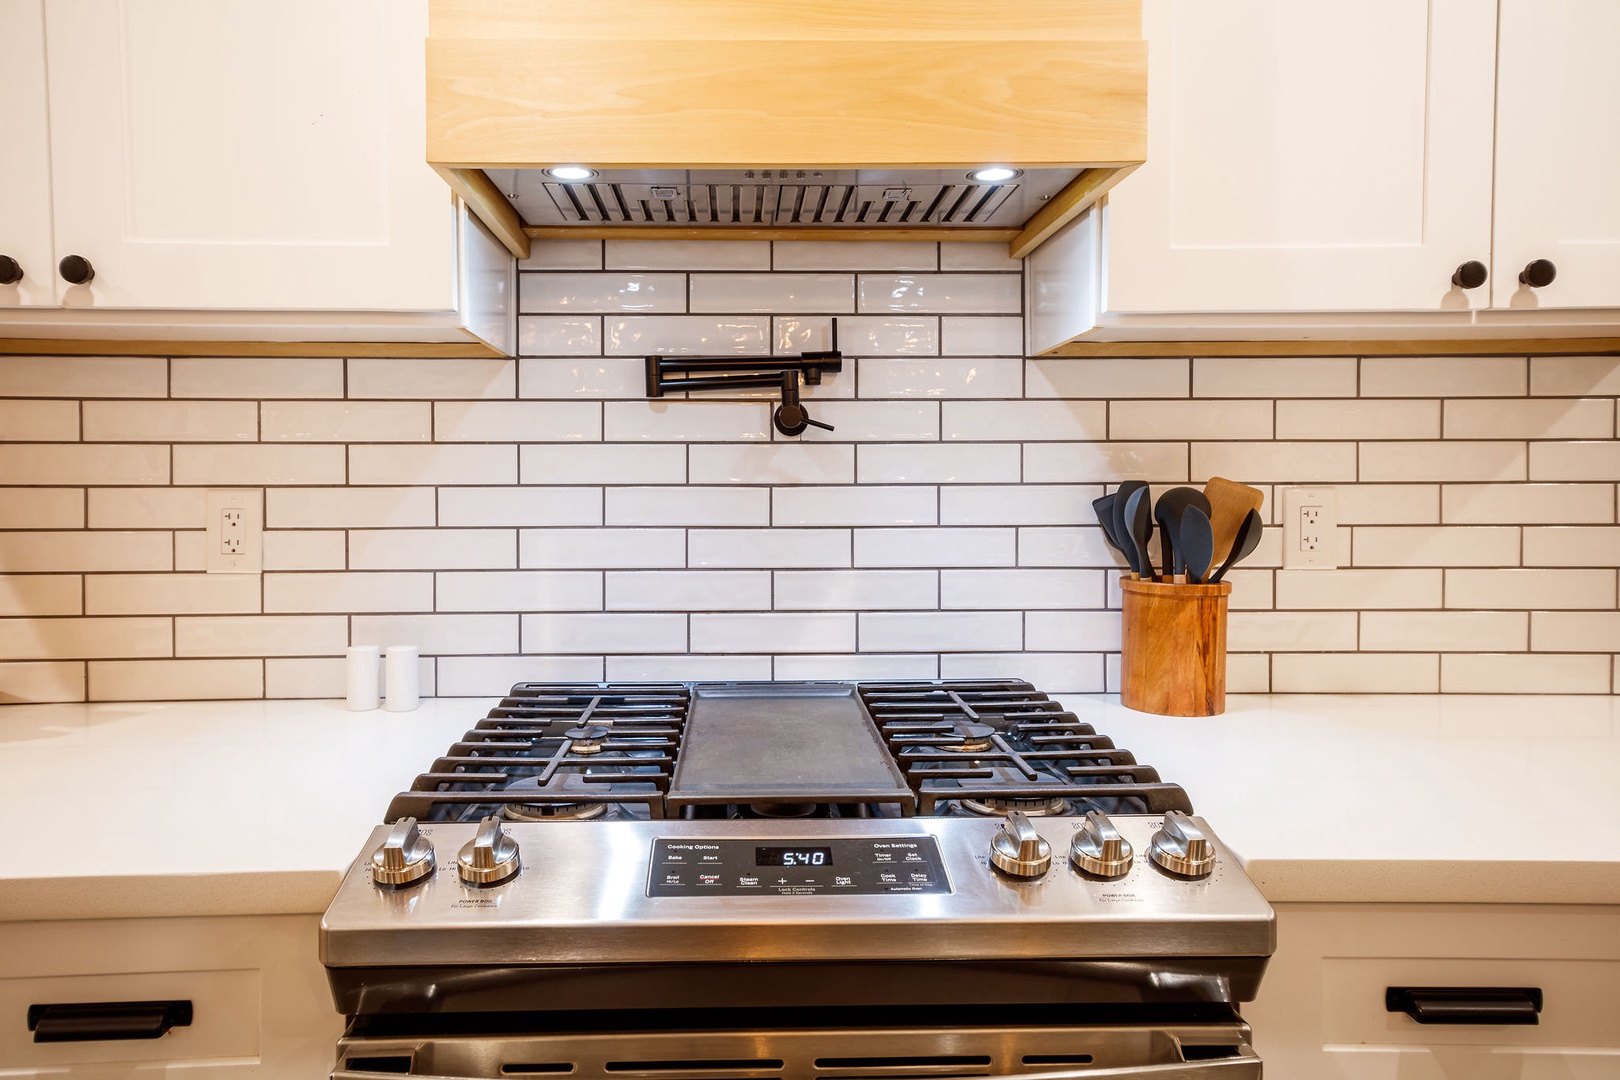 Enjoy luxe cooking on this gas stove and griddle